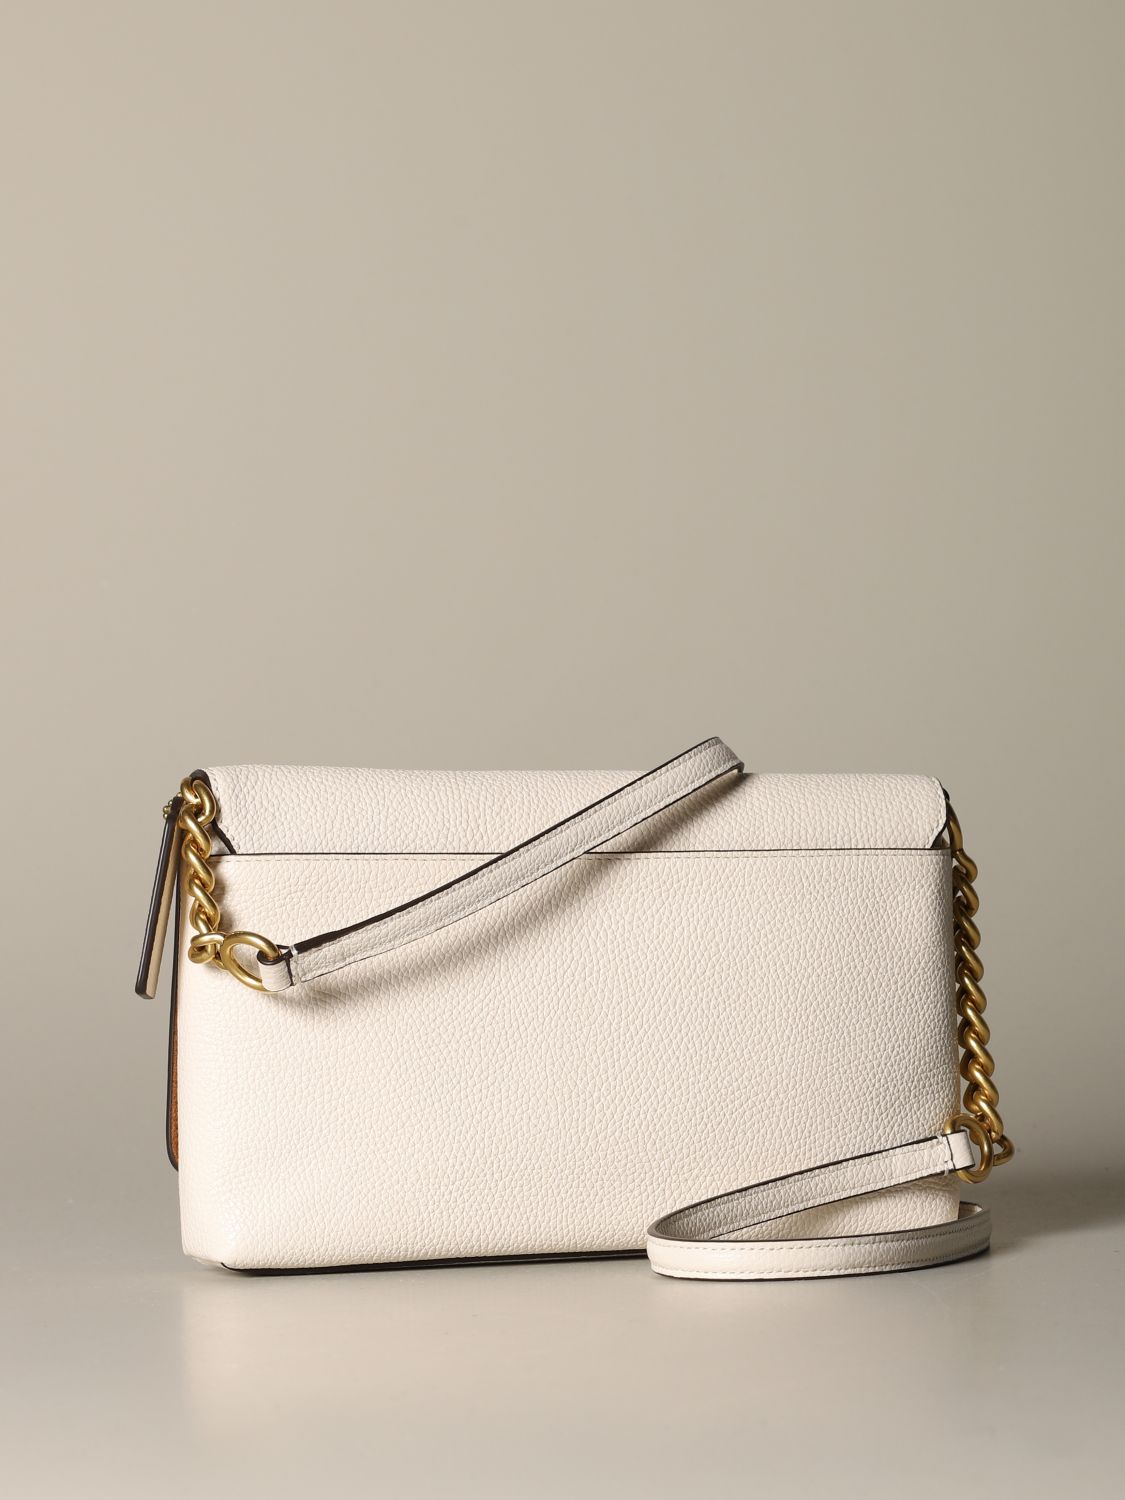 COACH: Crosstown bag in textured leather - Yellow Cream | Coach ...